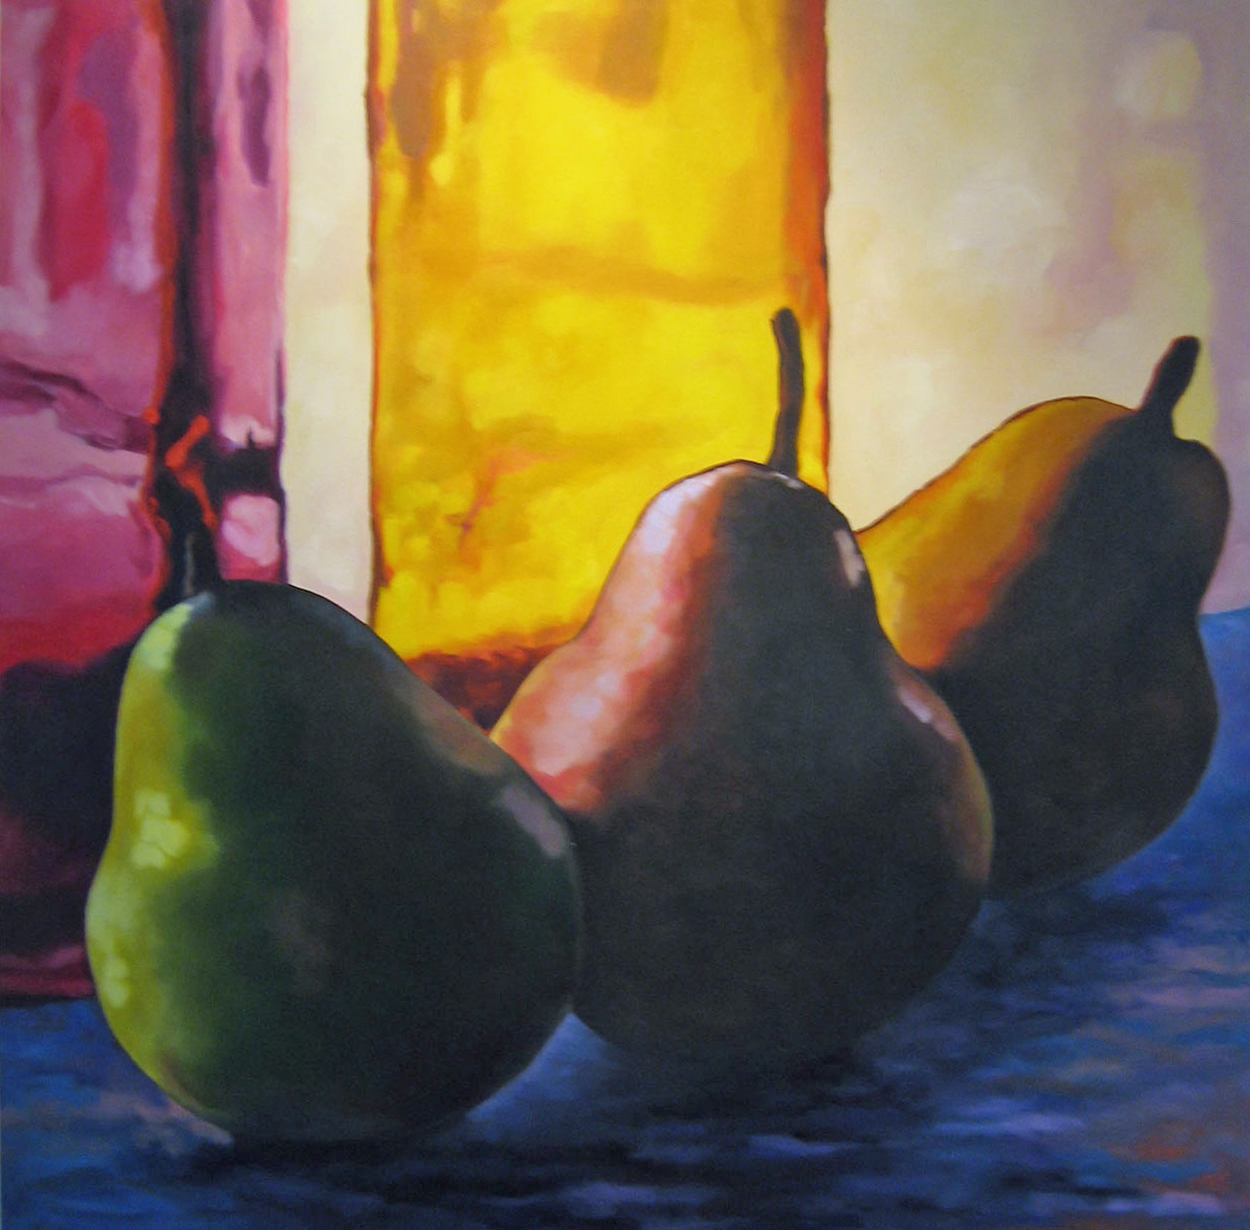 Pears and Mediation